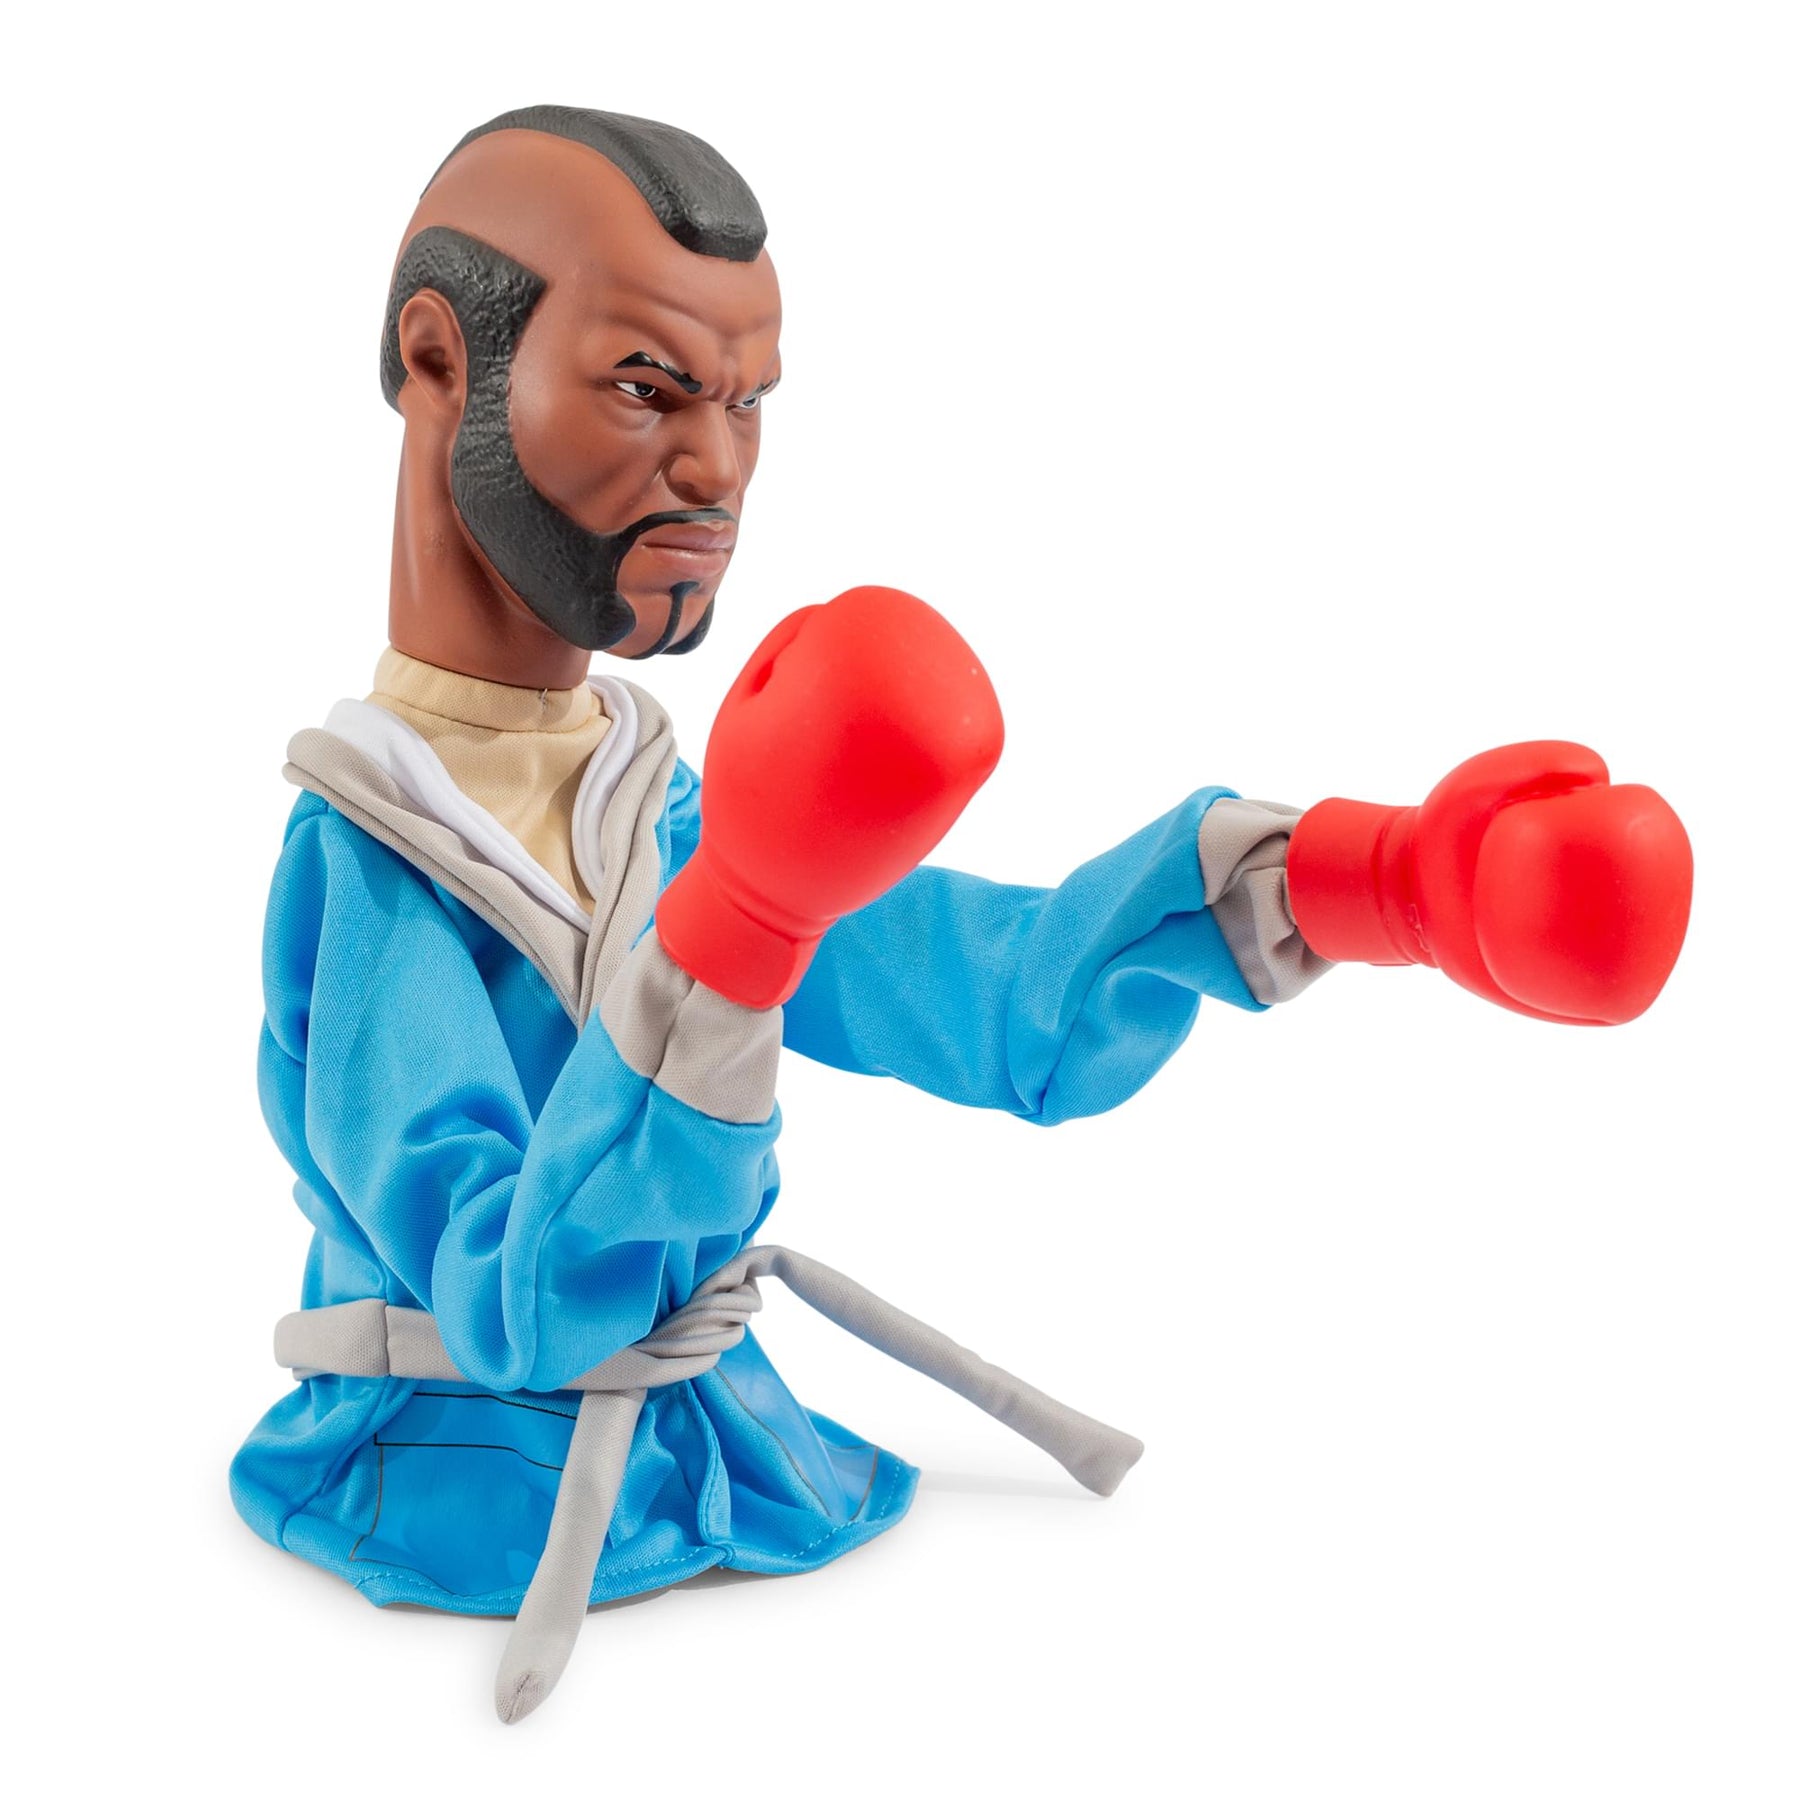 Rocky Reachers Clubber Lang 13-Inch Boxing Puppet Toy | Toynk Exclusive